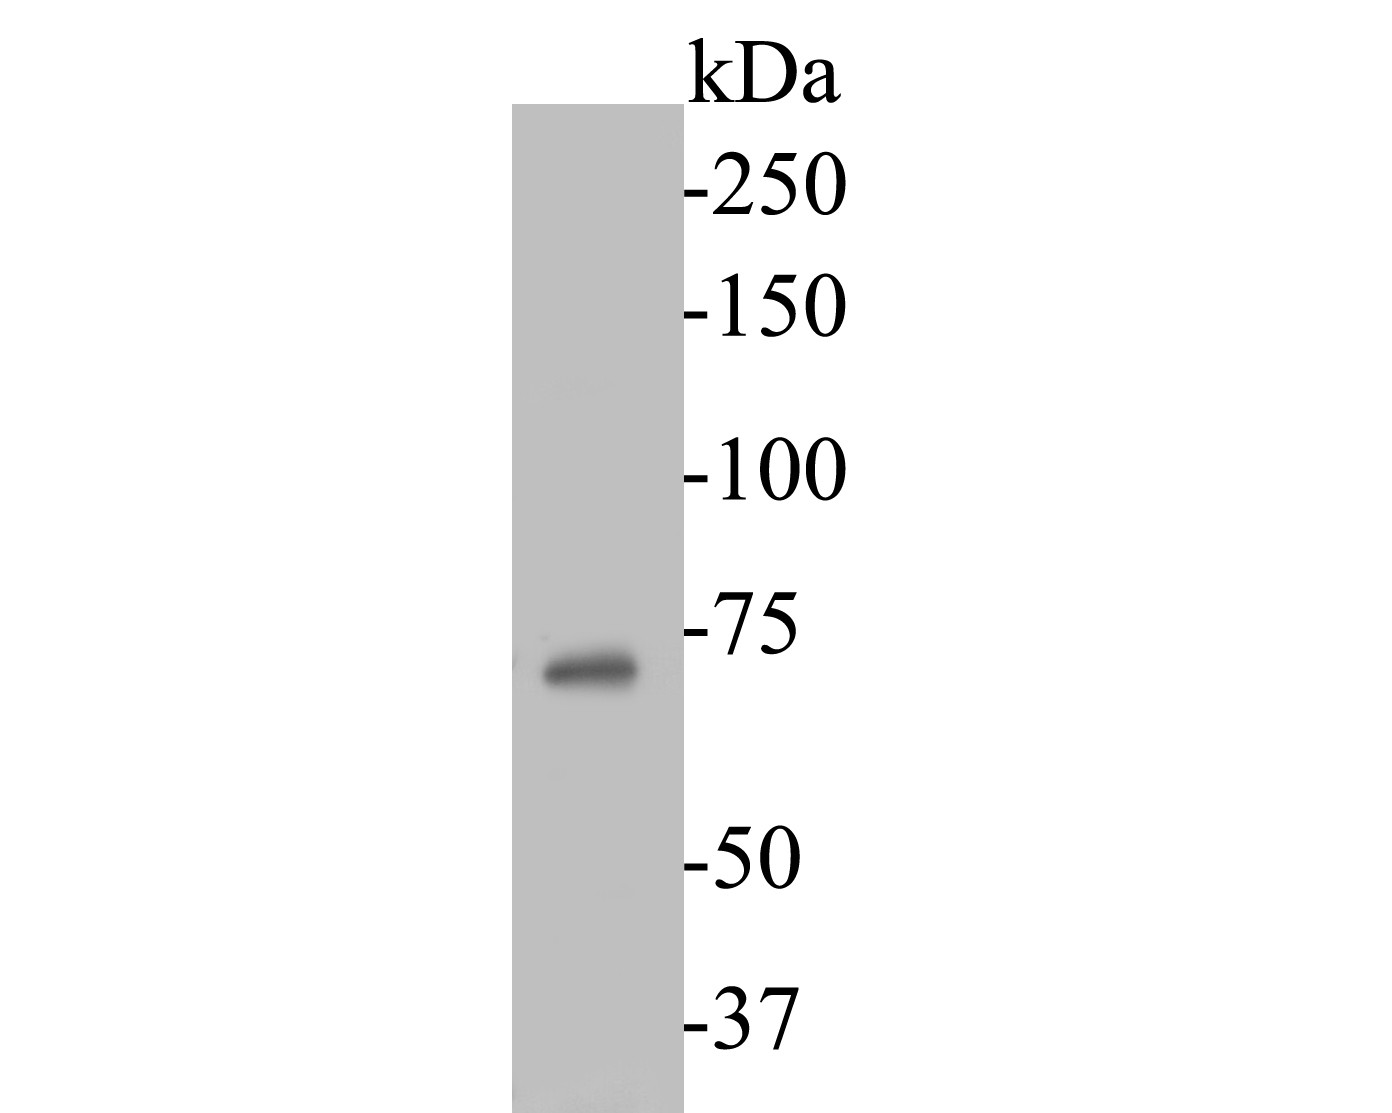 Western blot analysis of Dux on Raji cell lysates. Proteins were transferred to a PVDF membrane and blocked with 5% BSA in PBS for 1 hour at room temperature. The primary antibody (ER1901-52, 1/1,000) was used in 5% BSA at room temperature for 2 hours. Goat Anti-Rabbit IgG - HRP Secondary Antibody (HA1001) at 1:5,000 dilution was used for 1 hour at room temperature.